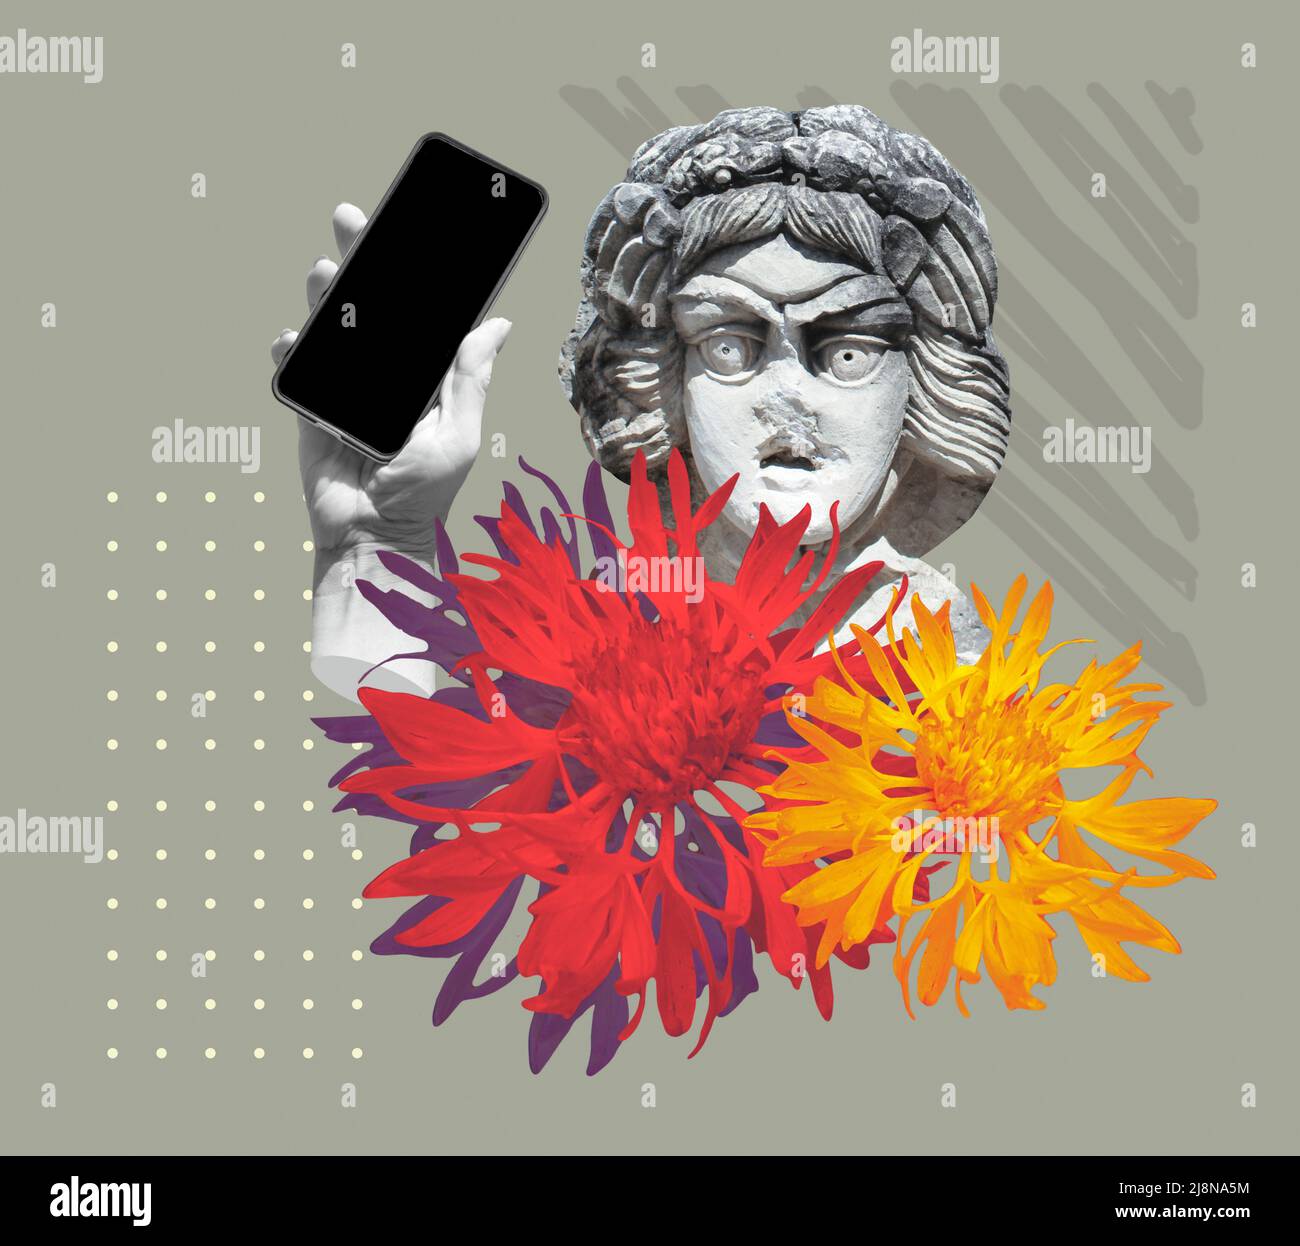 Fashion collage in magazine and pop art style. Statue holding modern blank frameless screen smartphone in a palm. Stock Photo